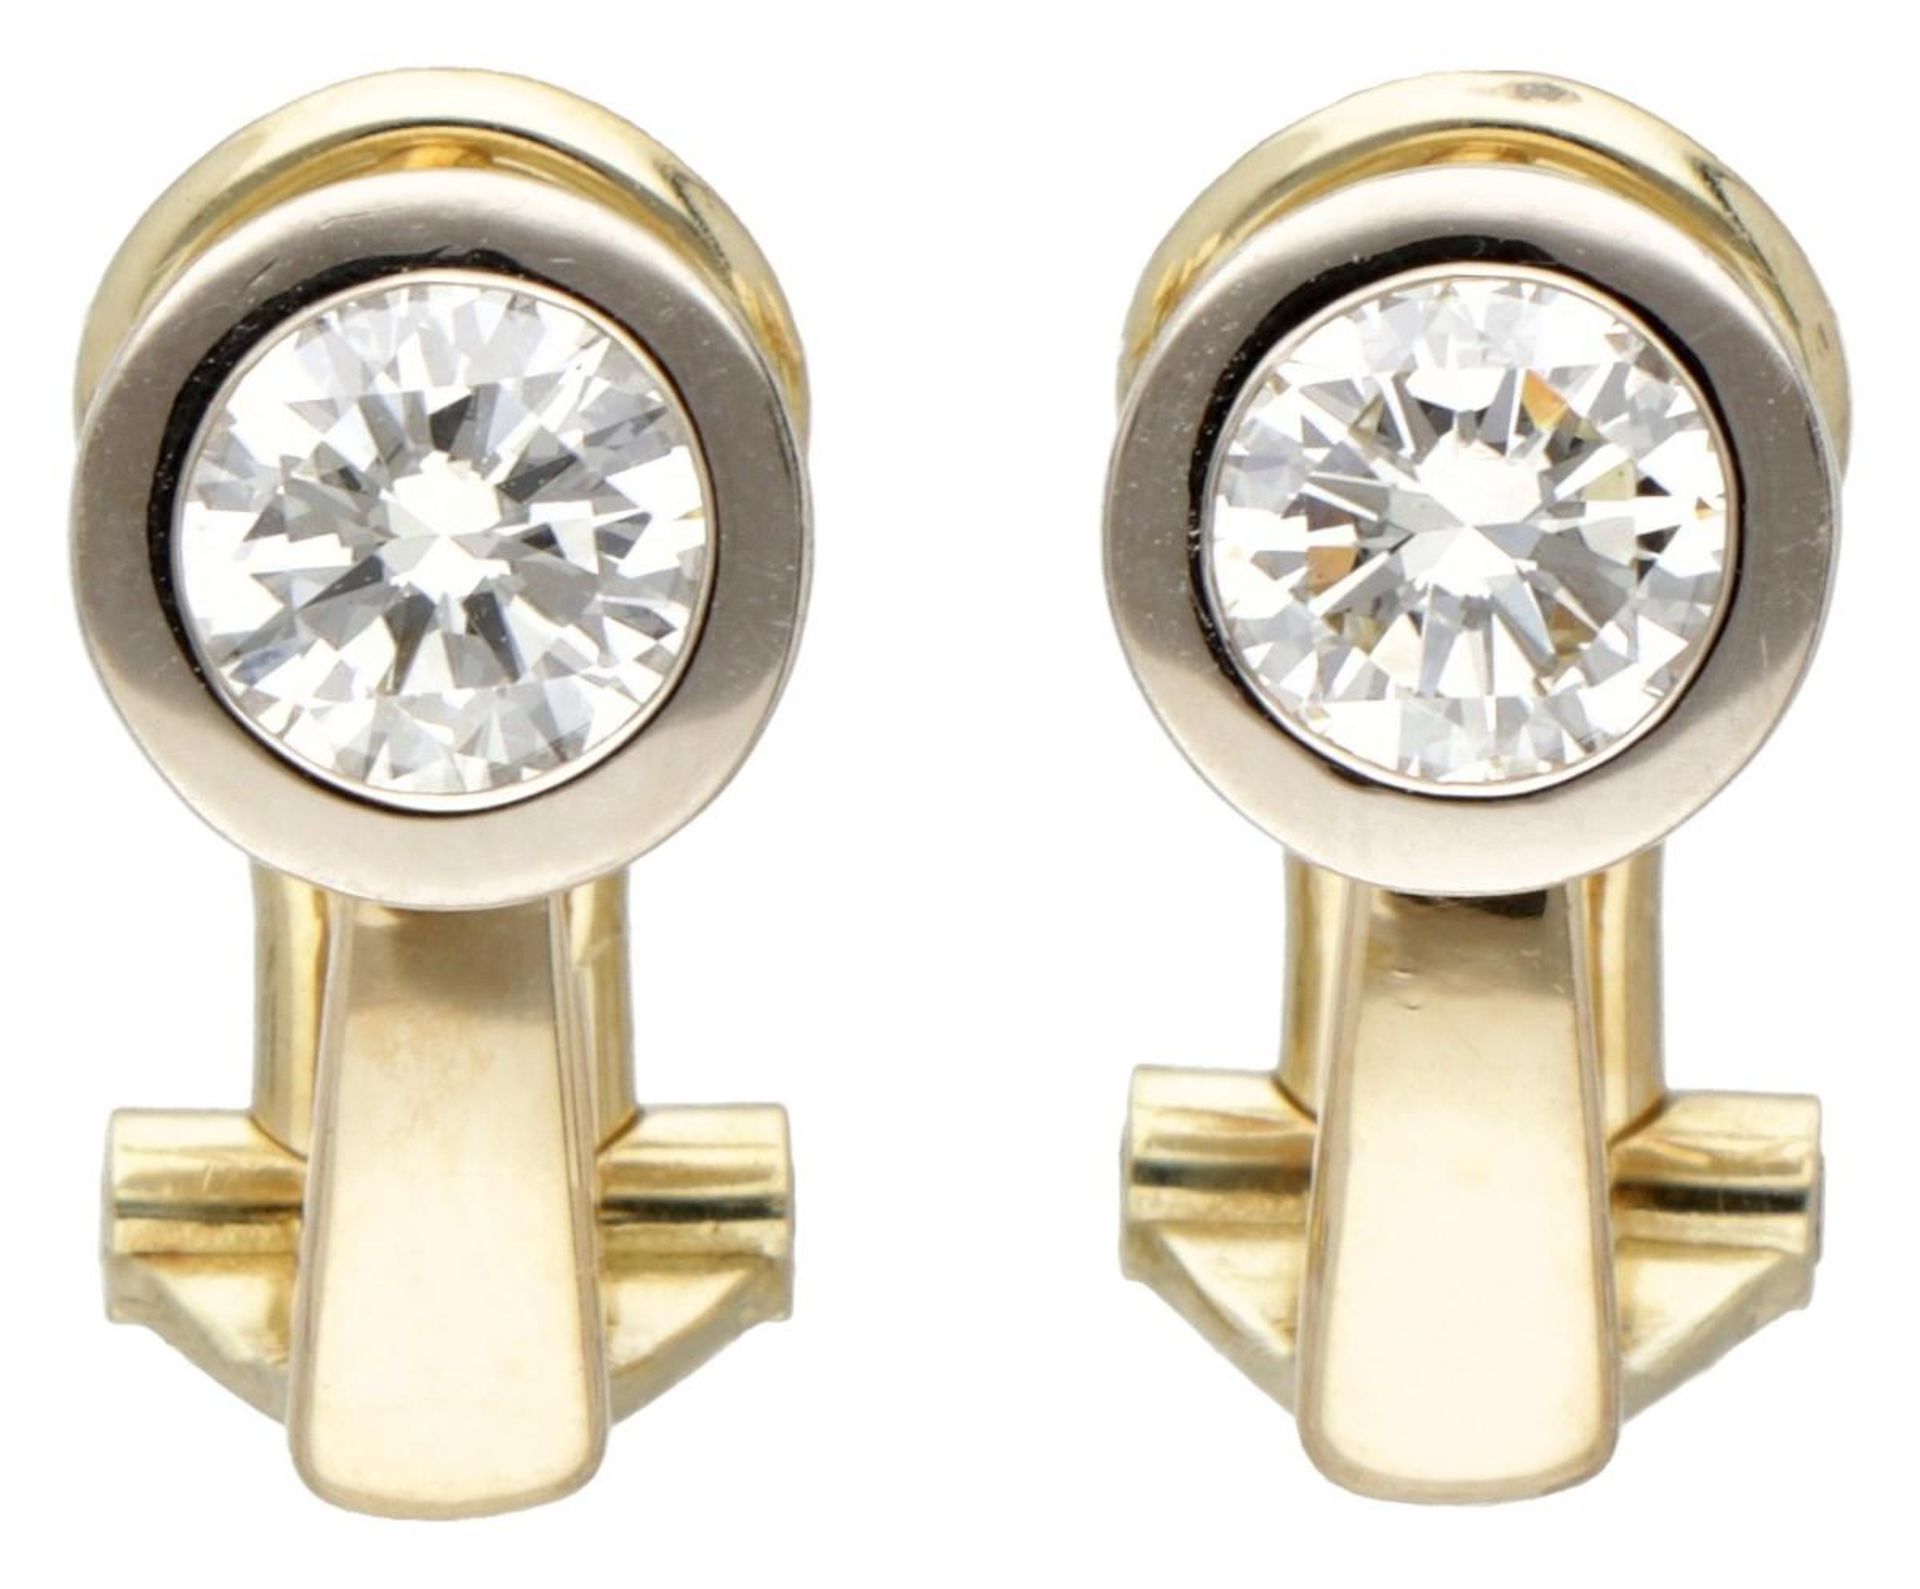 14K. Bicolor gold earrings set with approx. 0.88 ct. diamond.